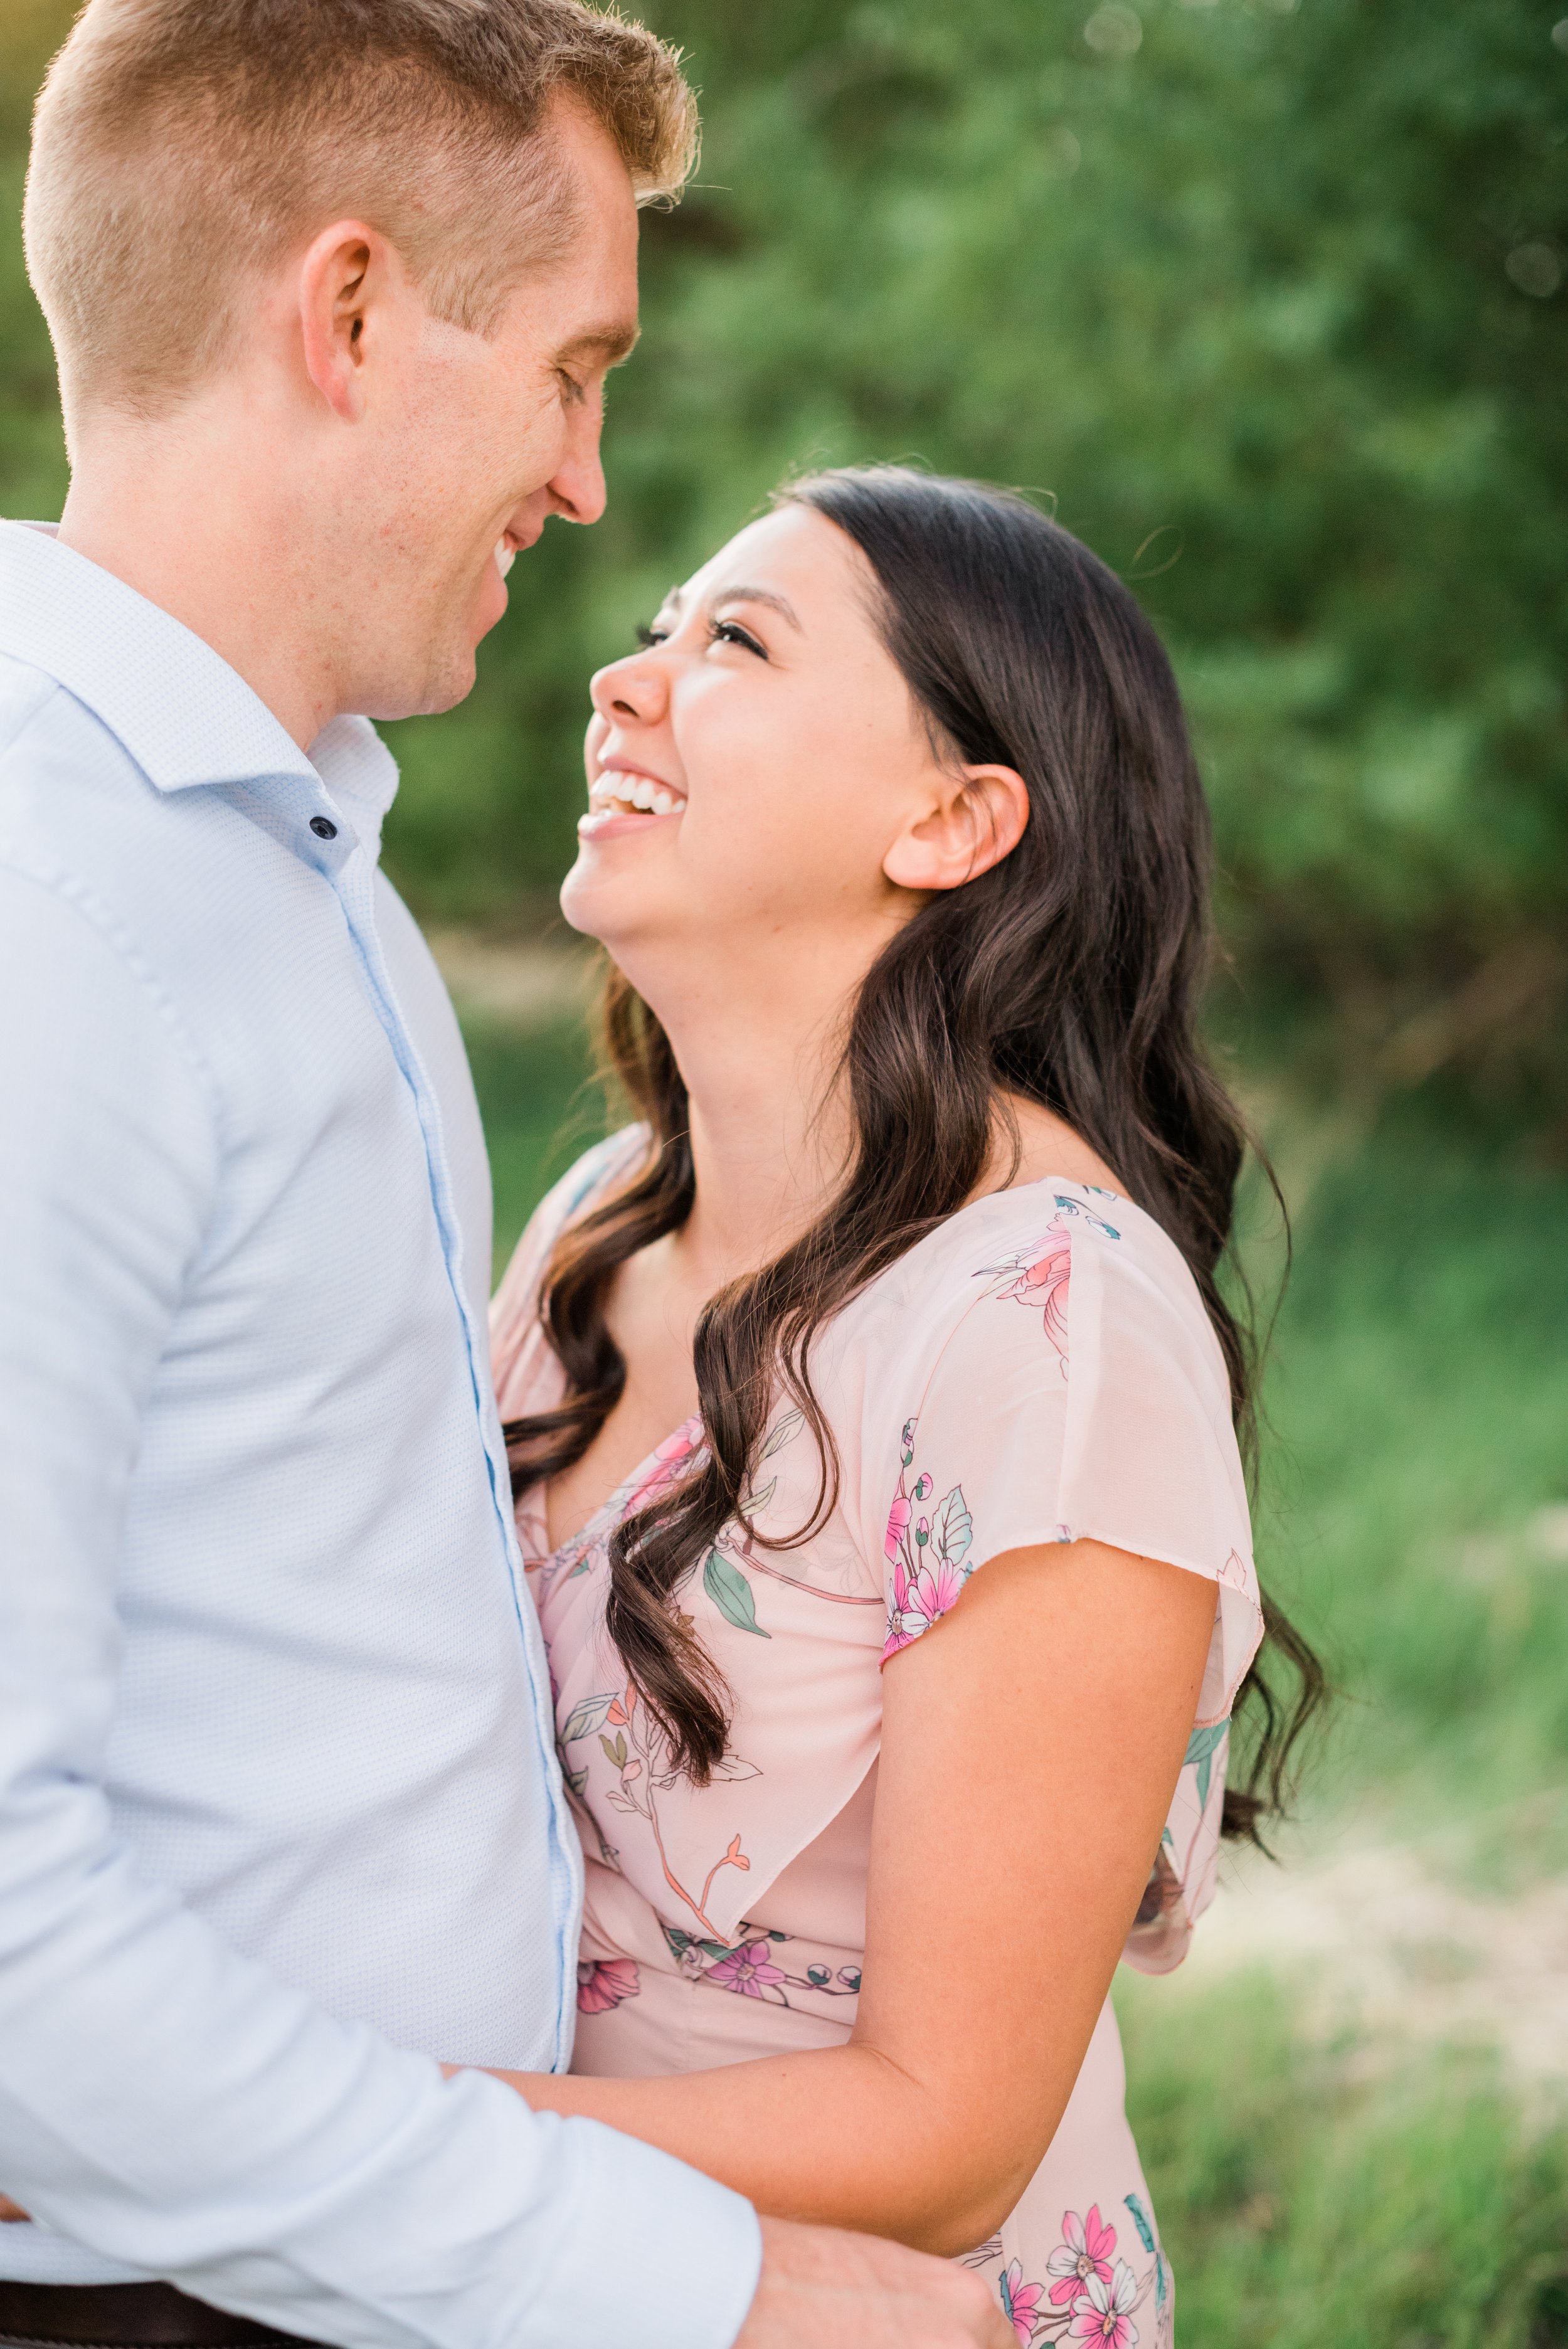  A wife smiles at her husband in a photo captured by Georgia-based photographer, Jacquie Erickson. email templates know your clients photo timeline updates #postphotoshoottips #GeorgiaFamilyPhotographer #photographertips #peachtreeGAphotographer&nbsp